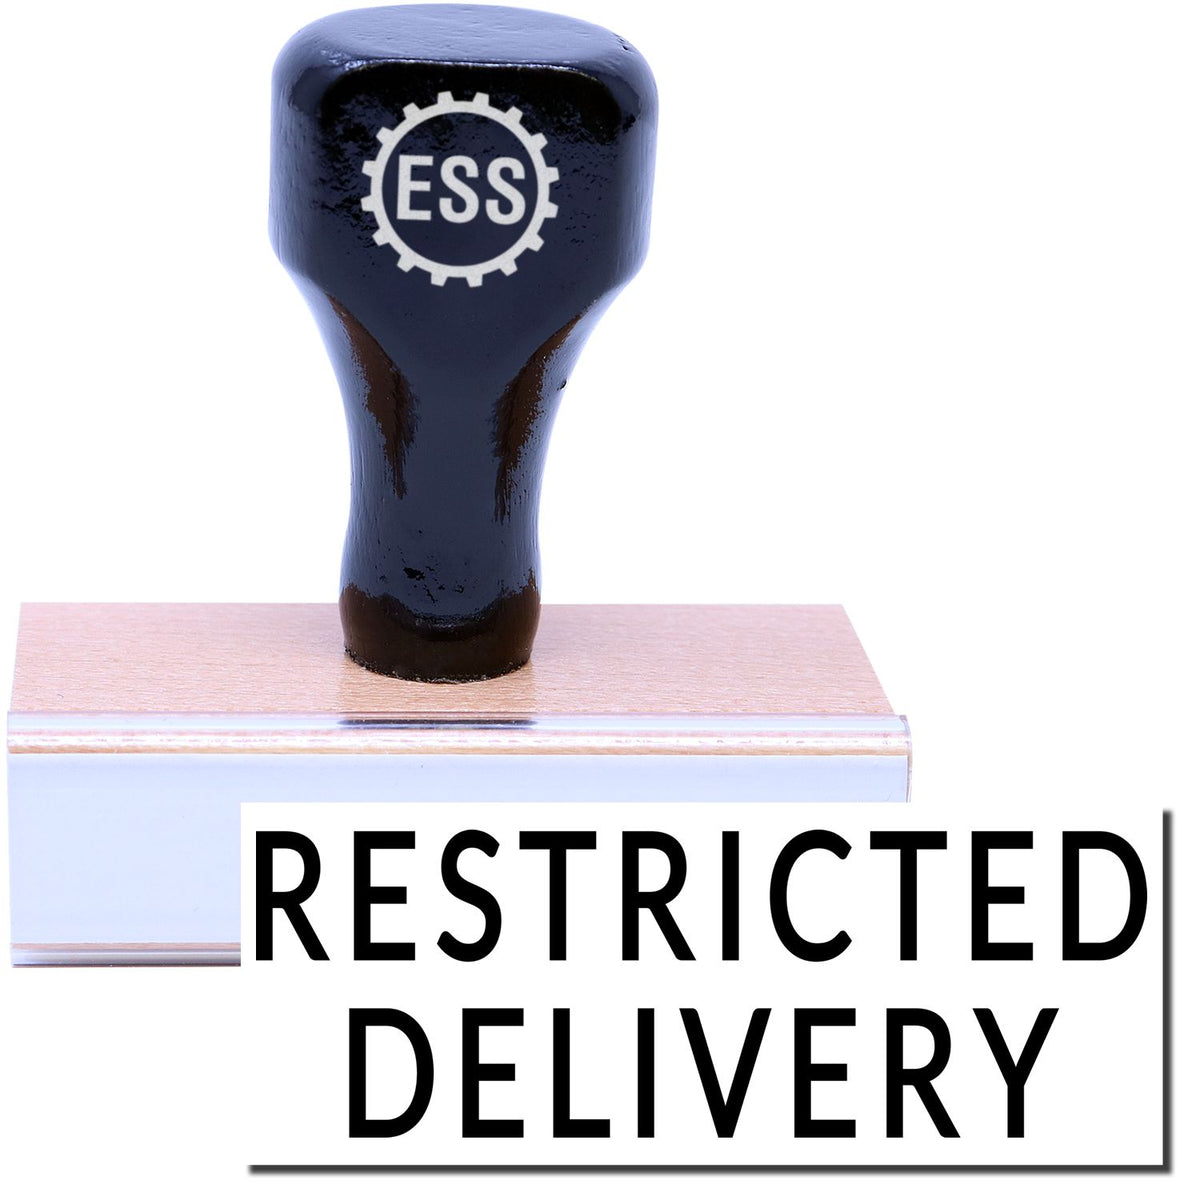 A stock office rubber stamp with a stamped image showing how the text &quot;RESTRICTED DELIVERY&quot; is displayed after stamping.